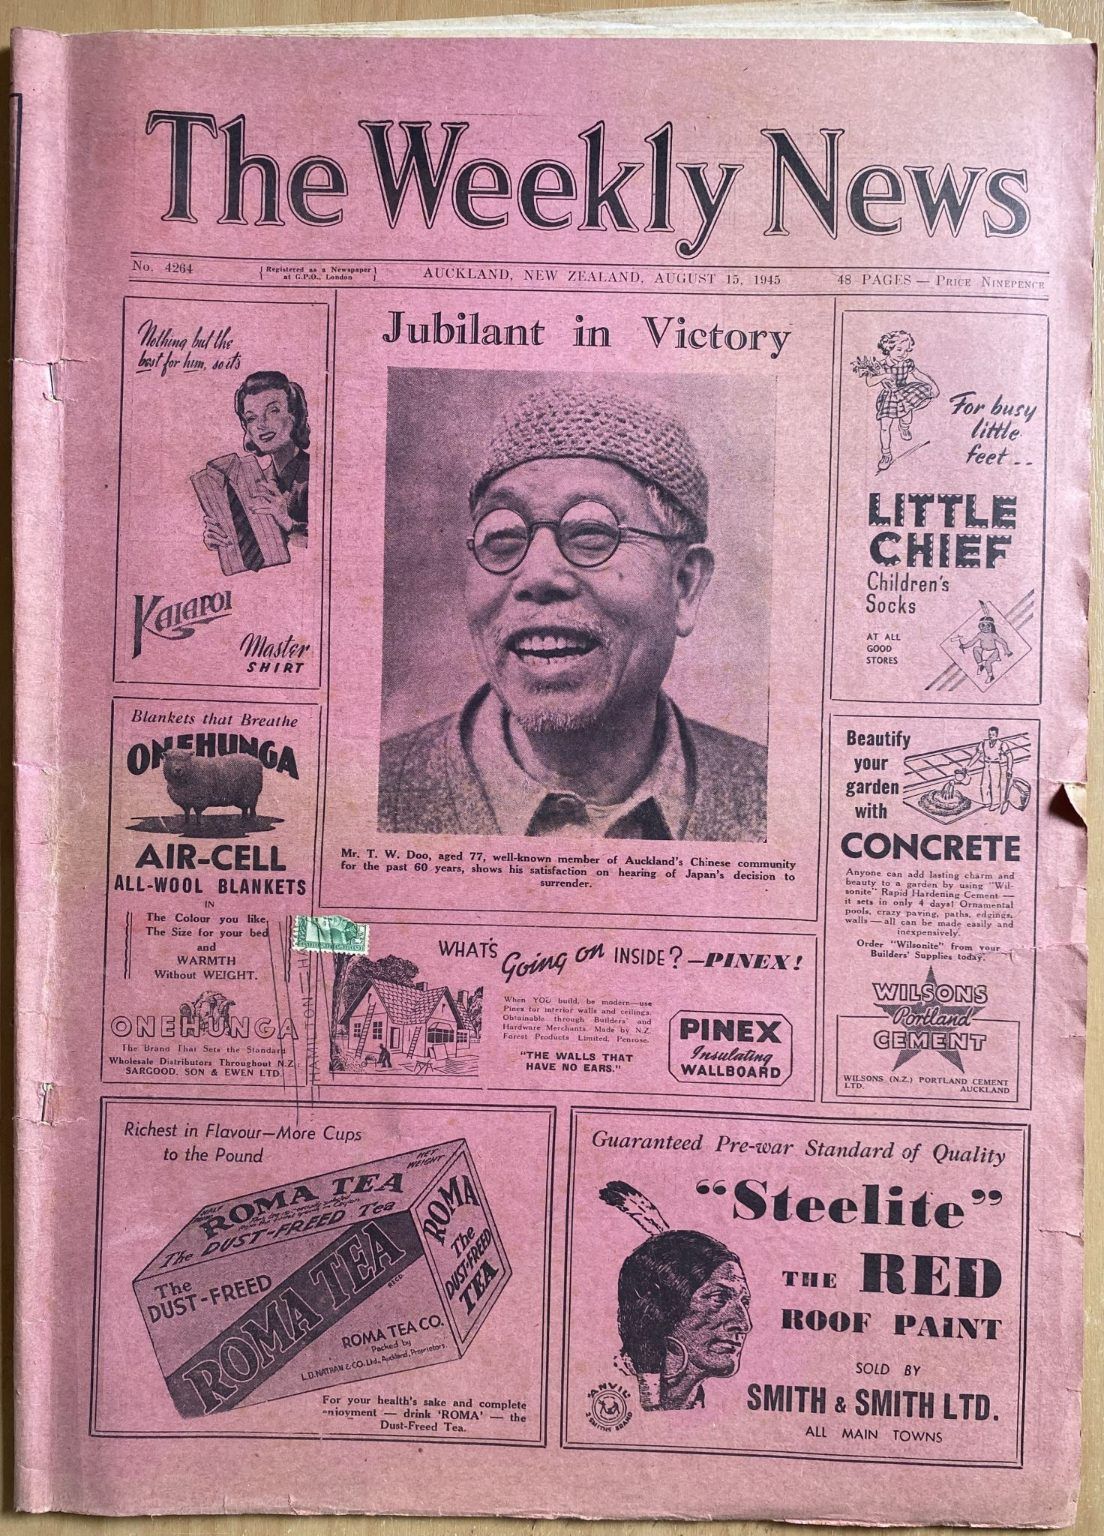 OLD NEWSPAPER: The Weekly News - No. 4264, 15 August 1945